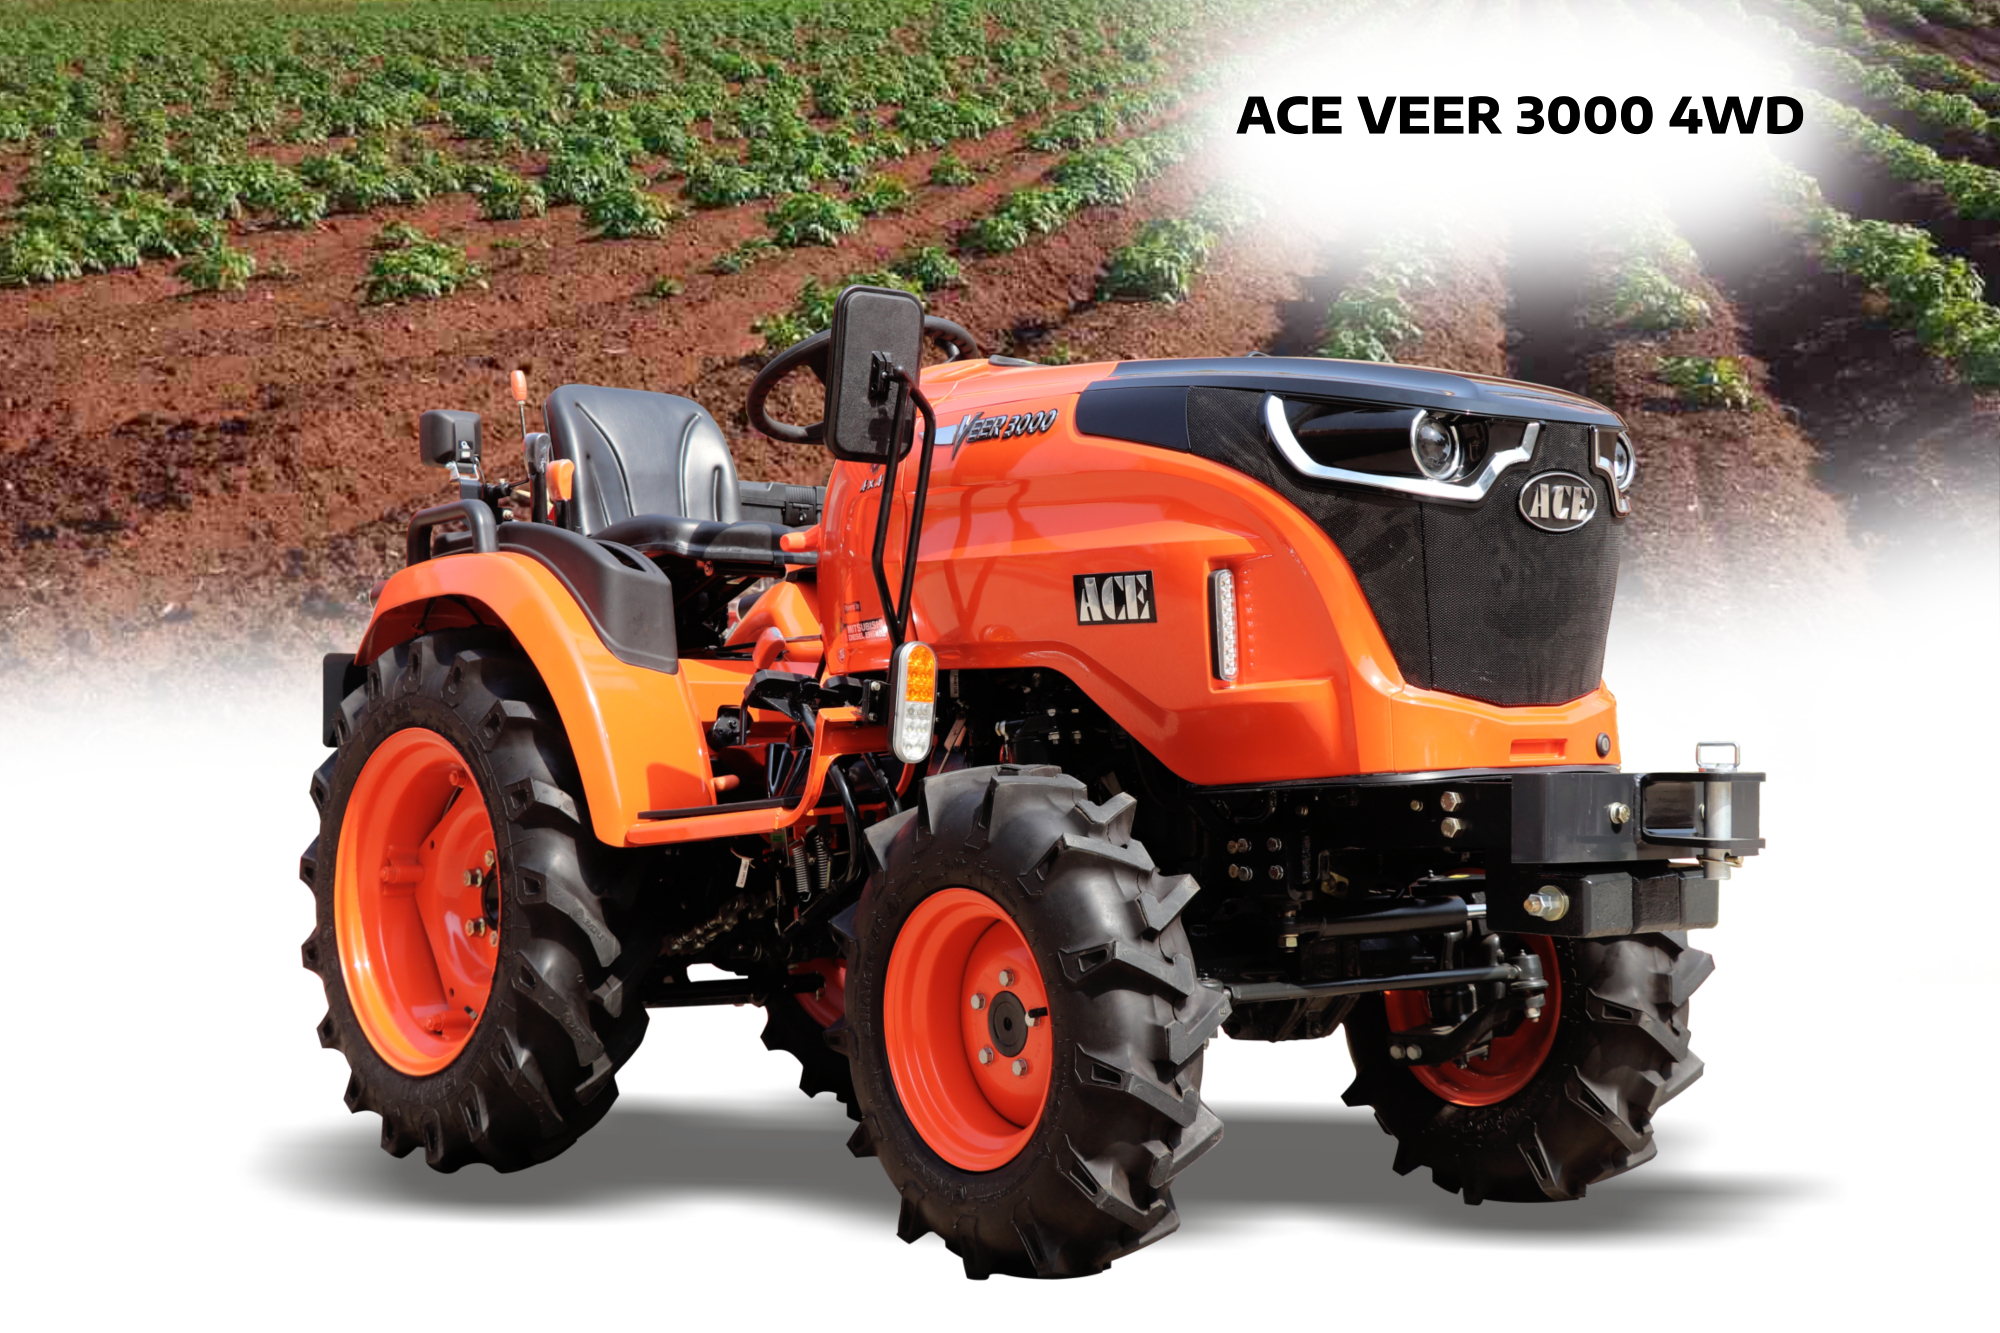 ACE VEER 3000 4WD Tractor